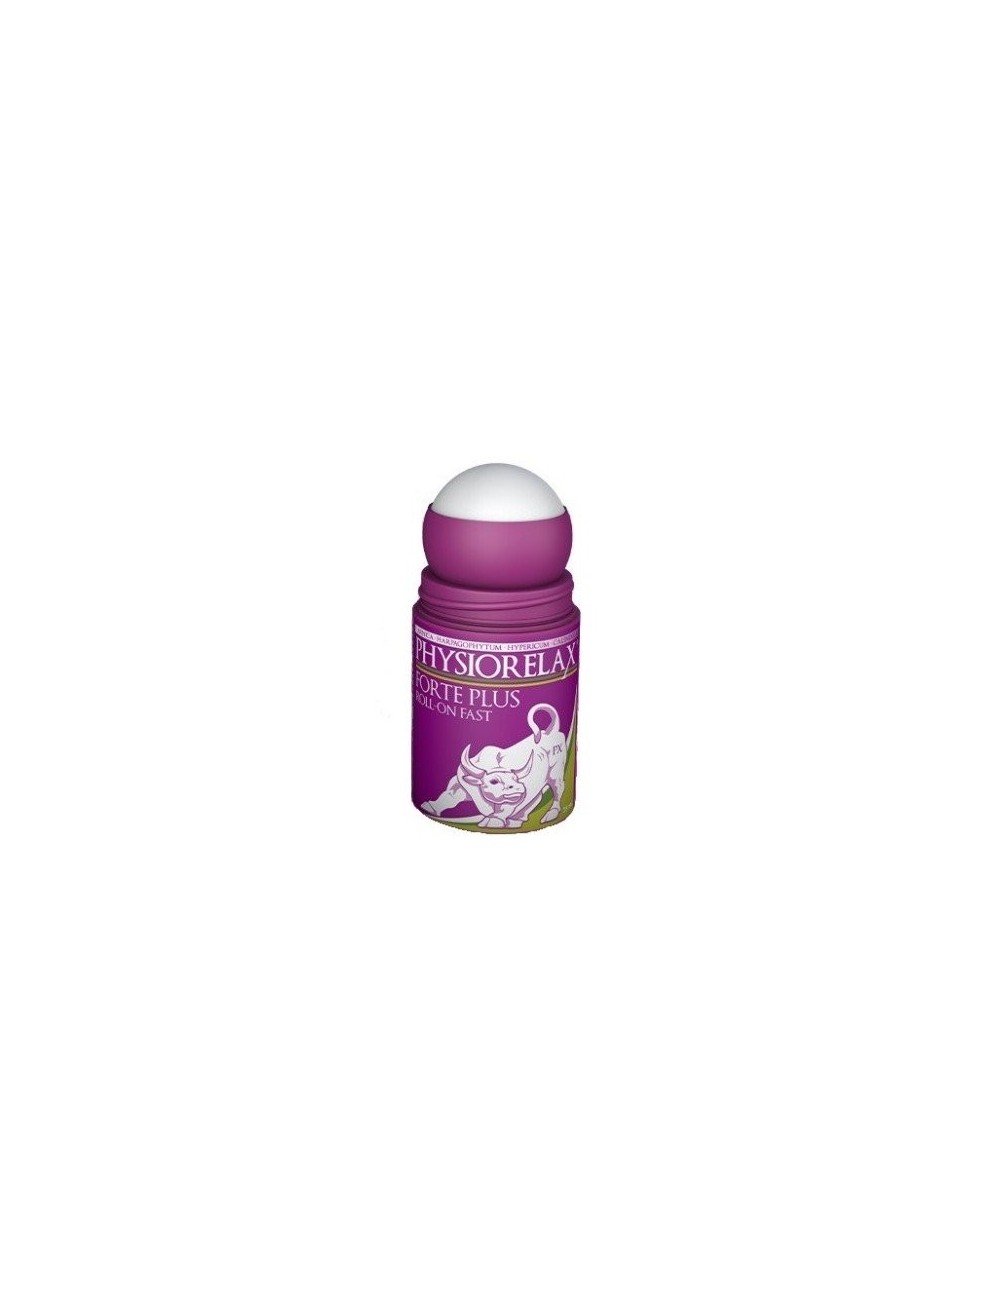 PHYSIORELAX FORTE PLUS FAST 1 ROLL ON 75 ML